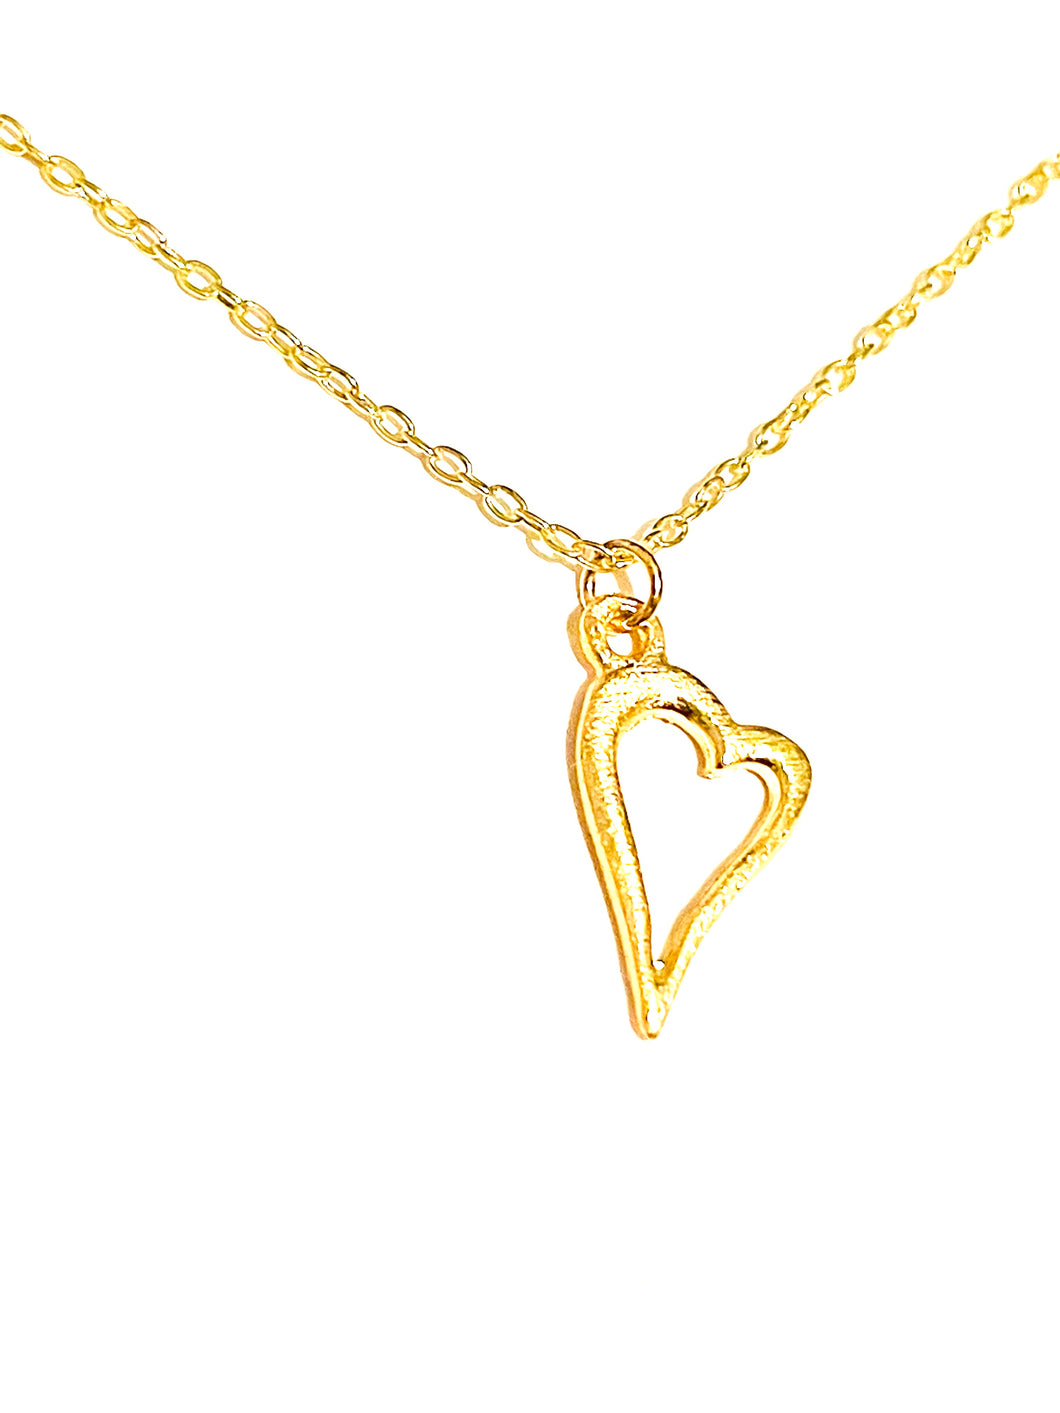 Necklace | Matte Gold Heart Silhouette